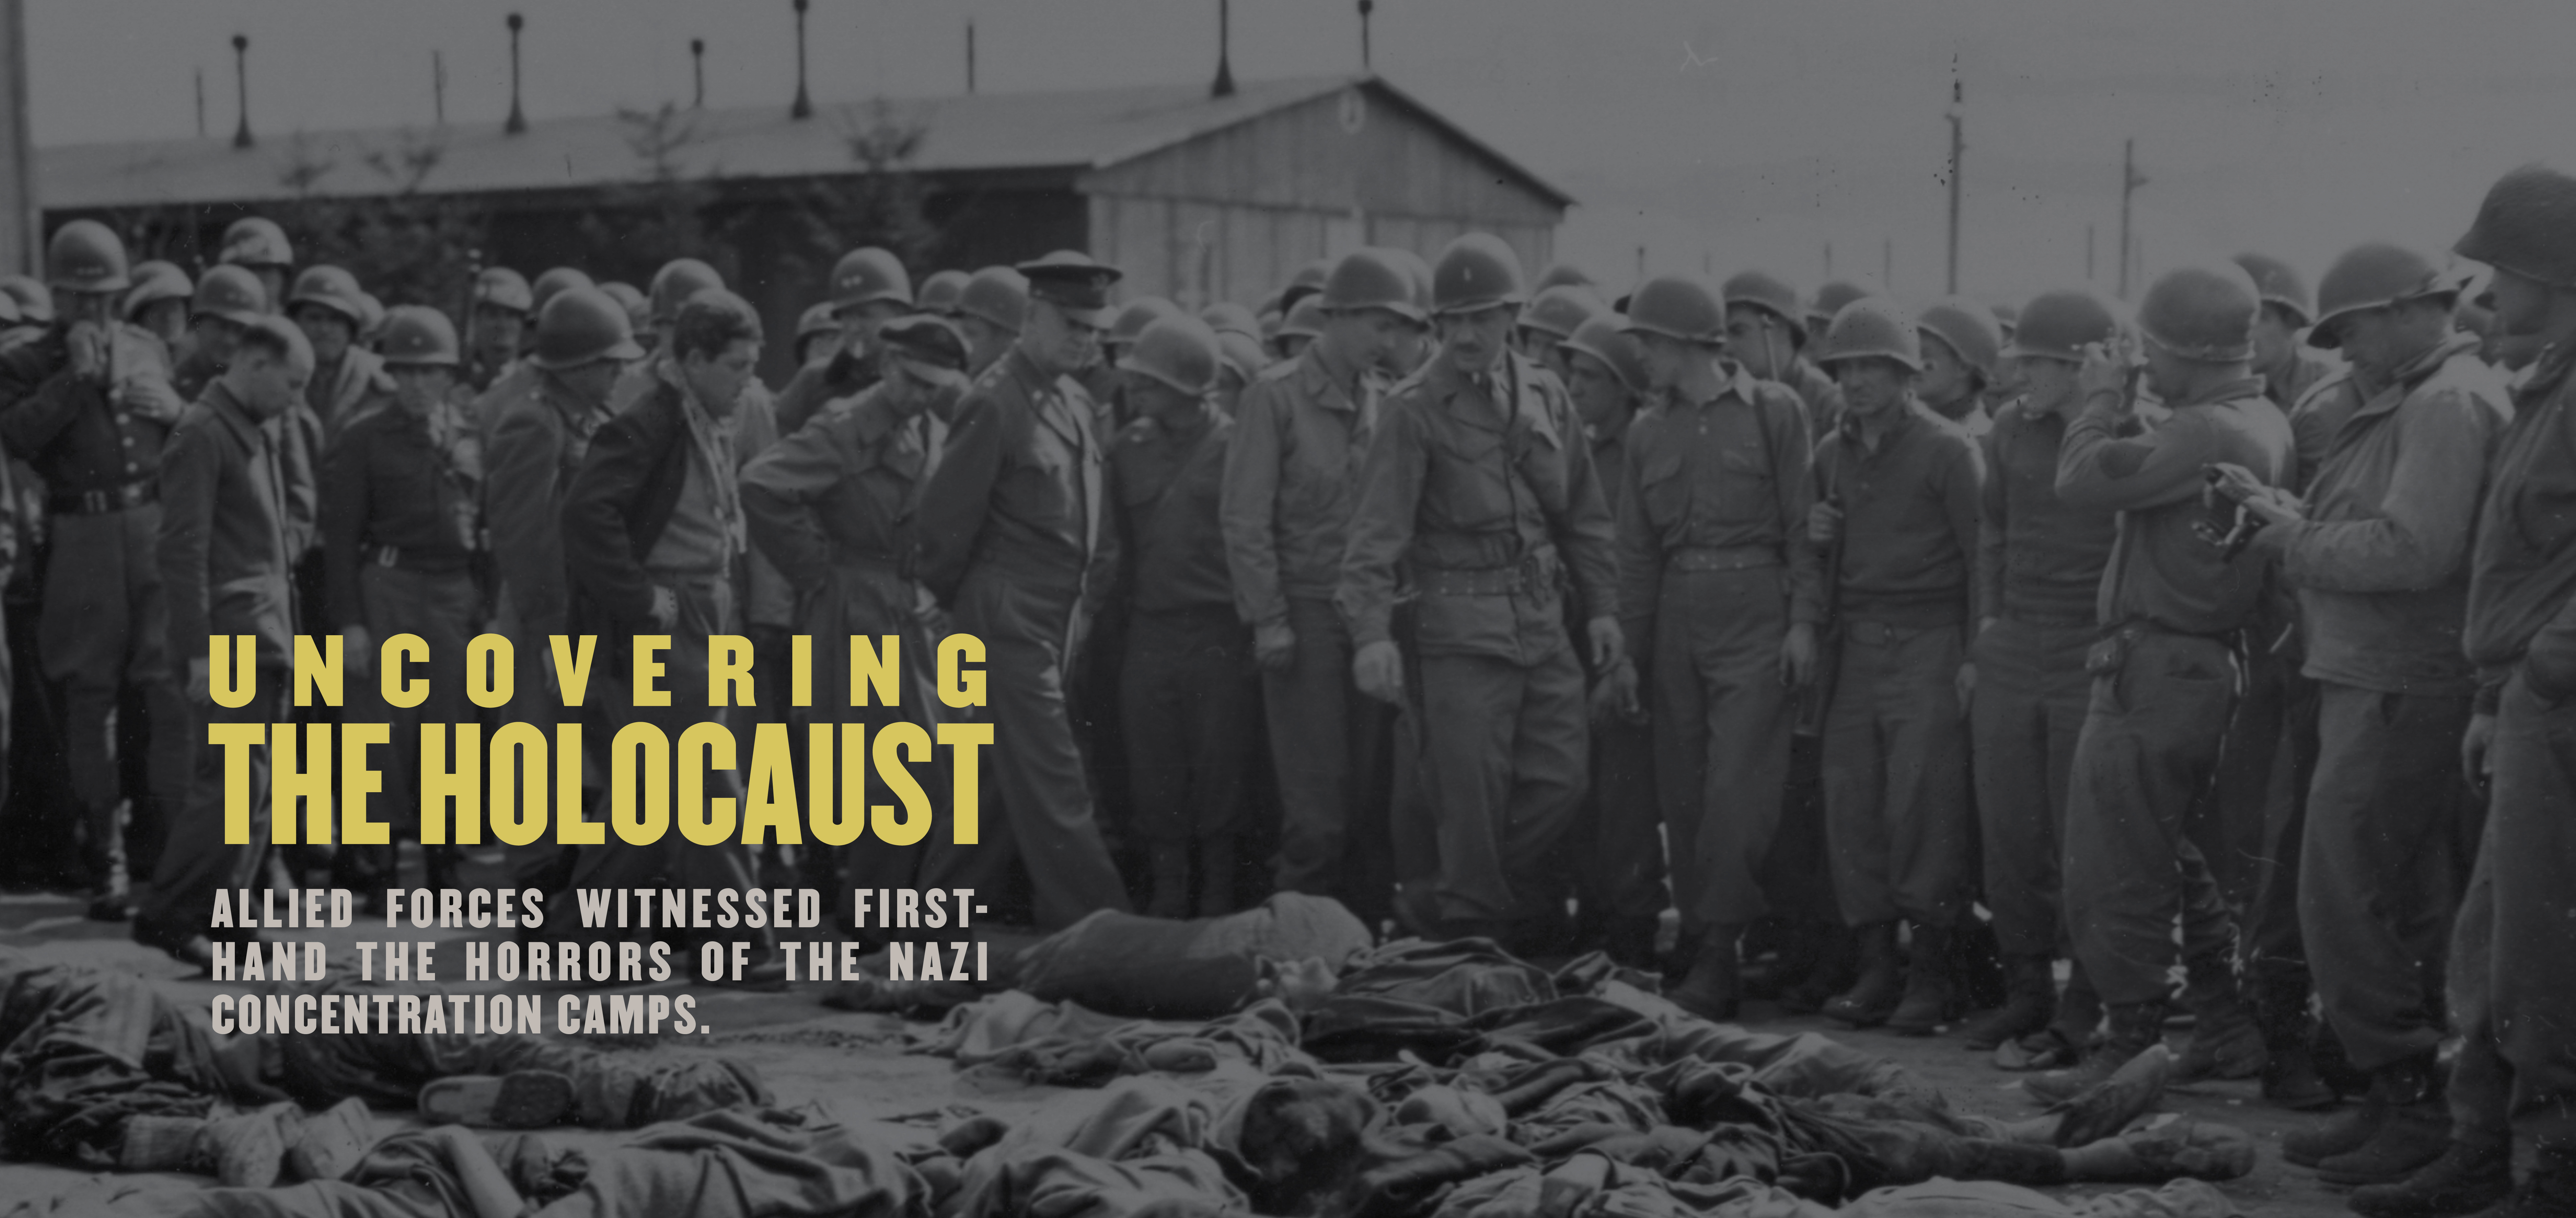 Uncovering the Holocaust Exhibit @ The National Infantry Museum